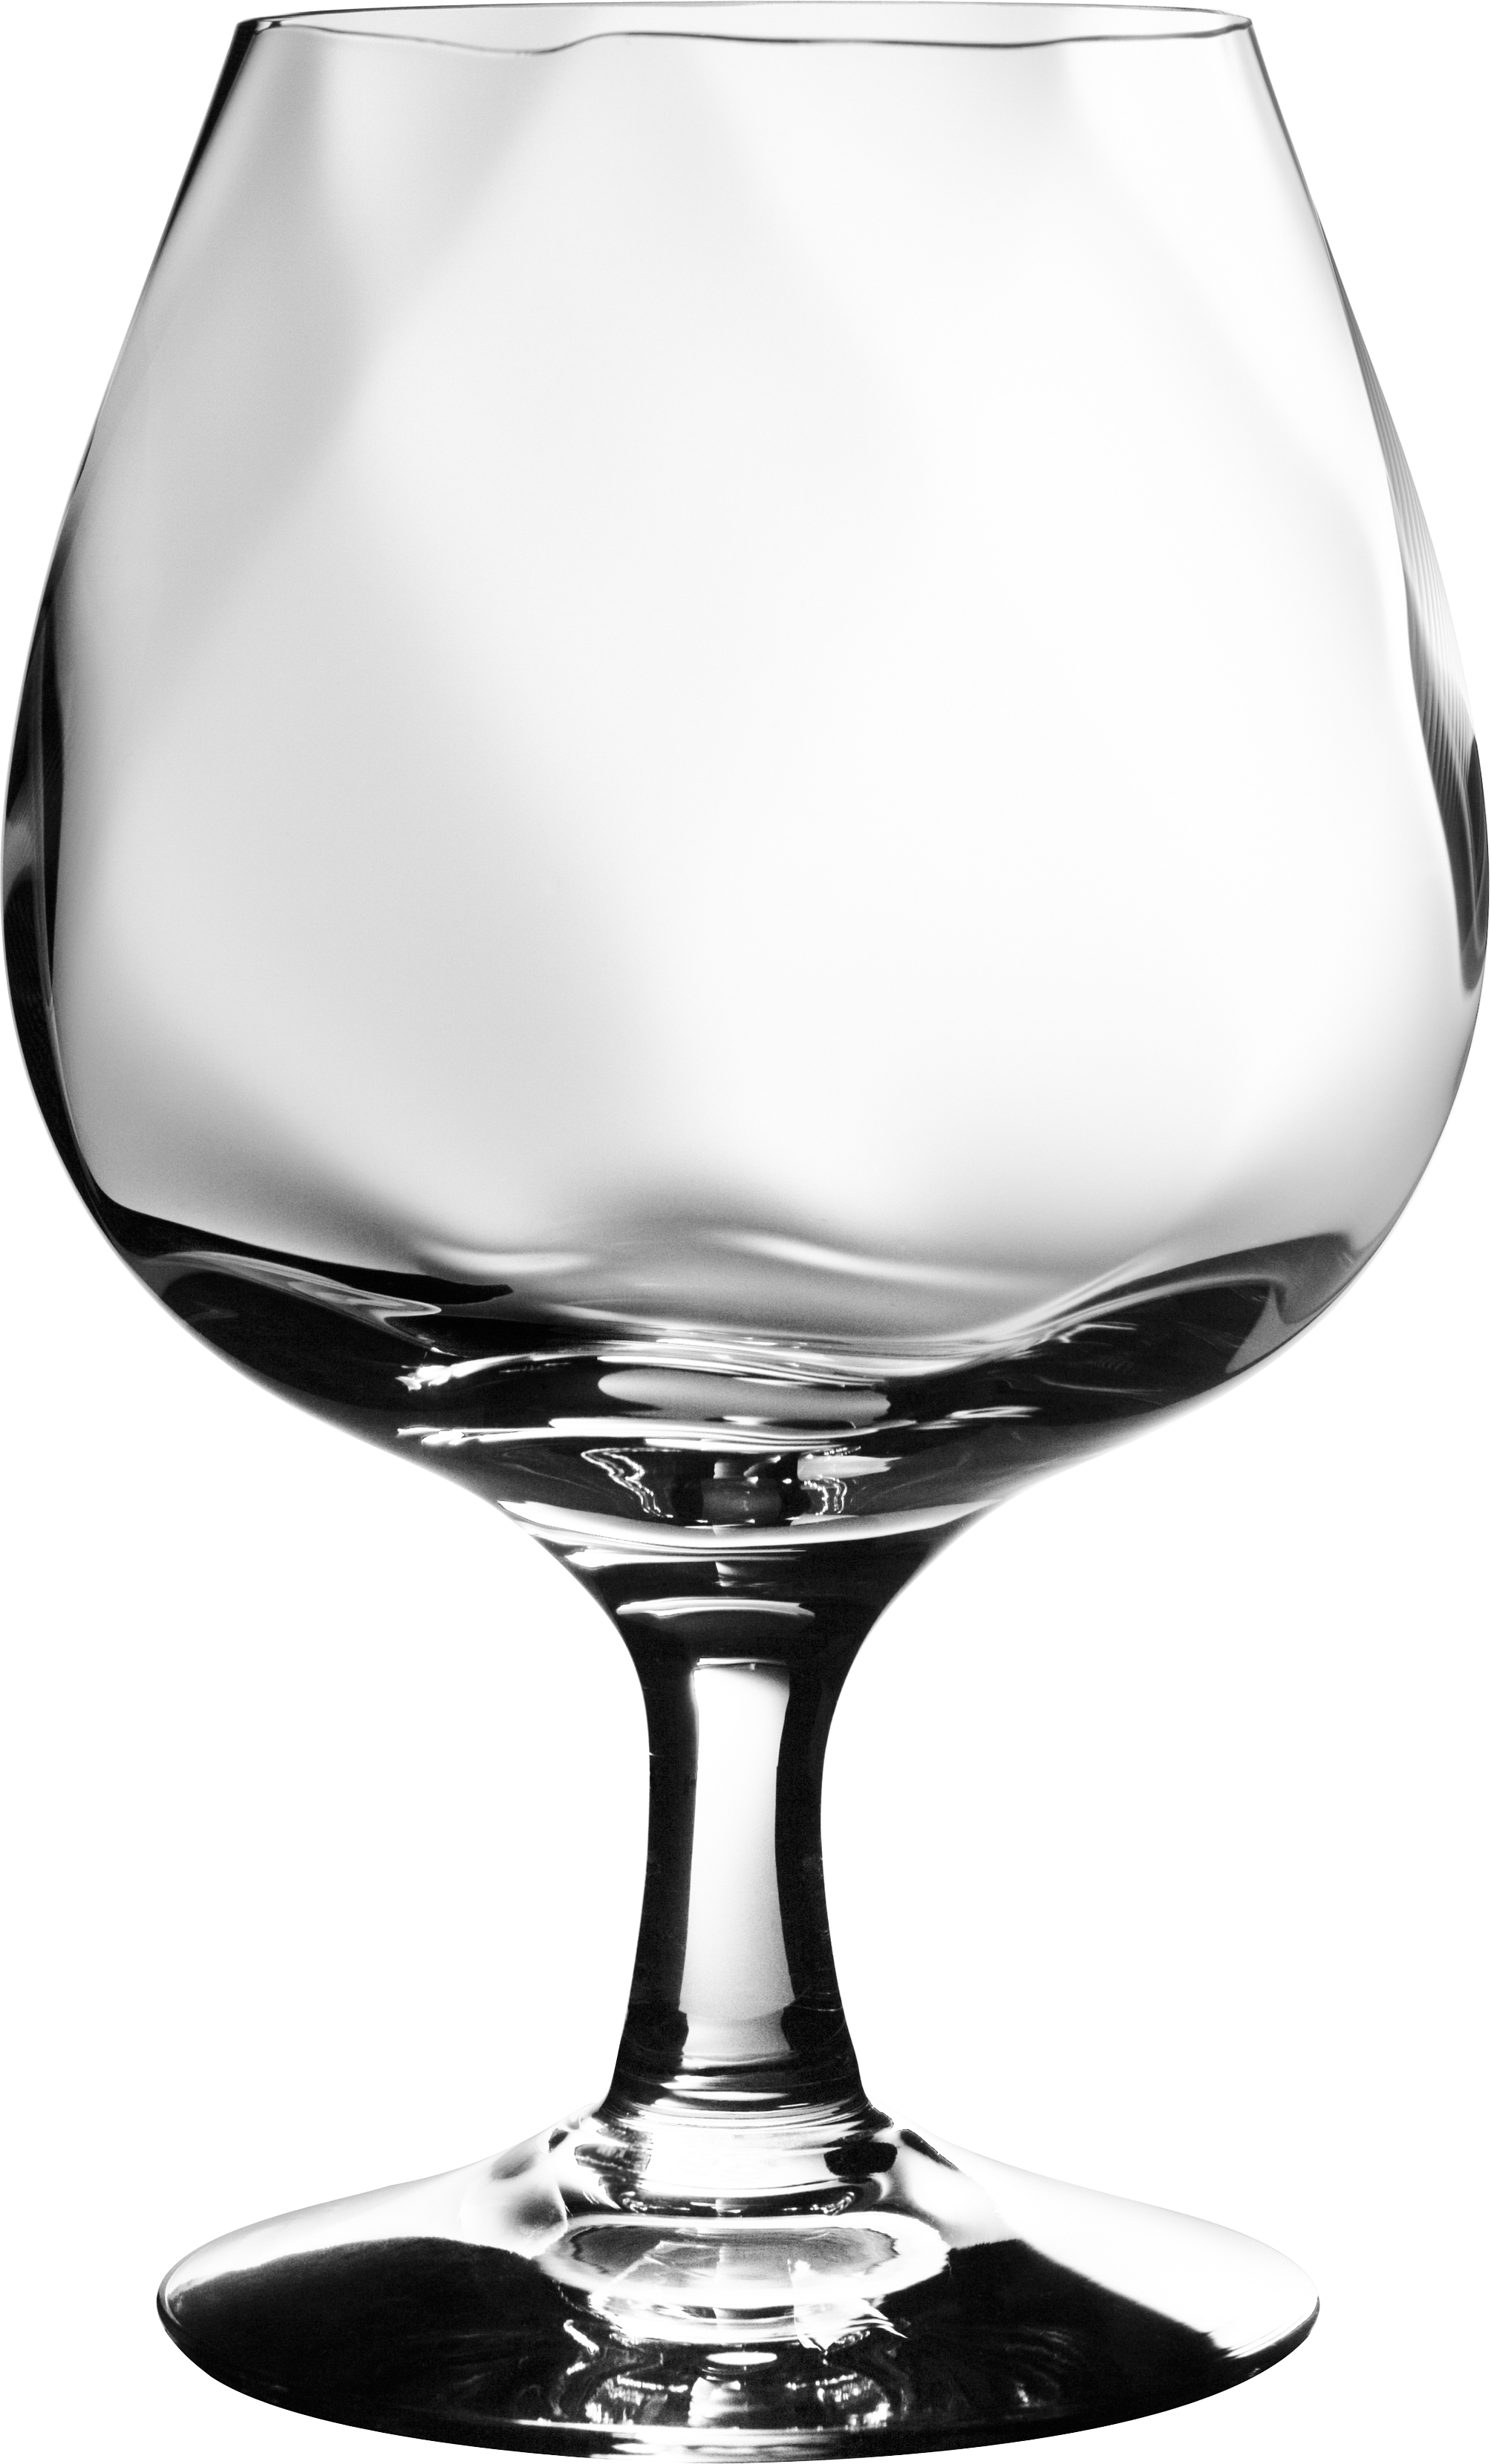 Drinking Glass Transparent Image PNG Image